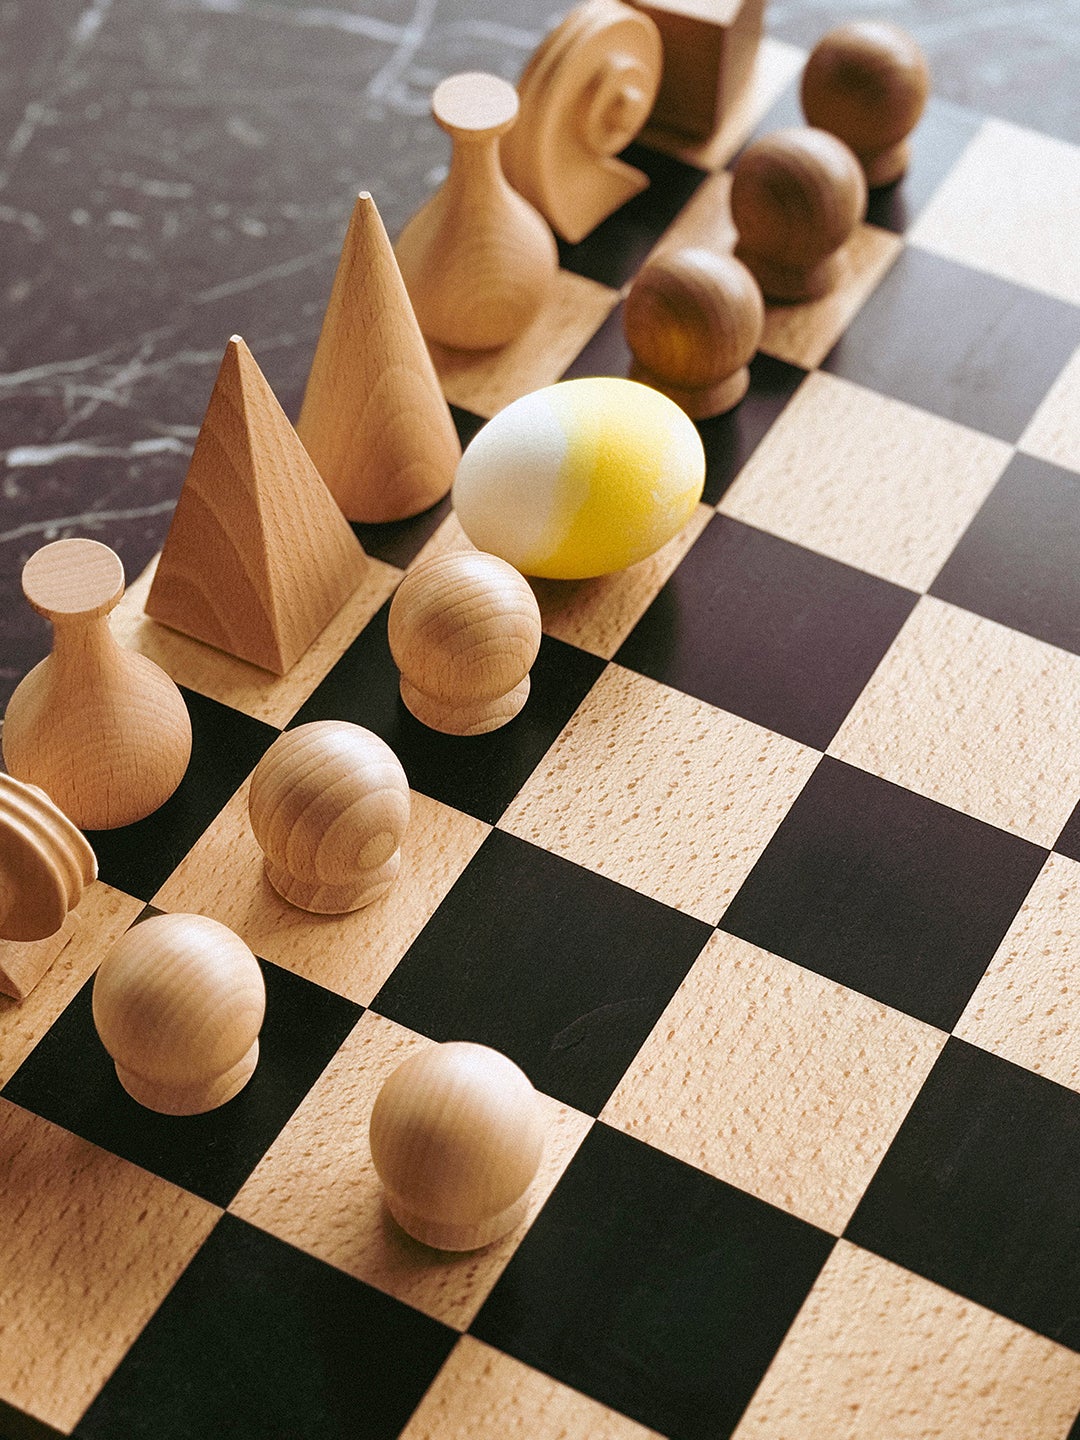 Easter egg as a chess piece on a chess board